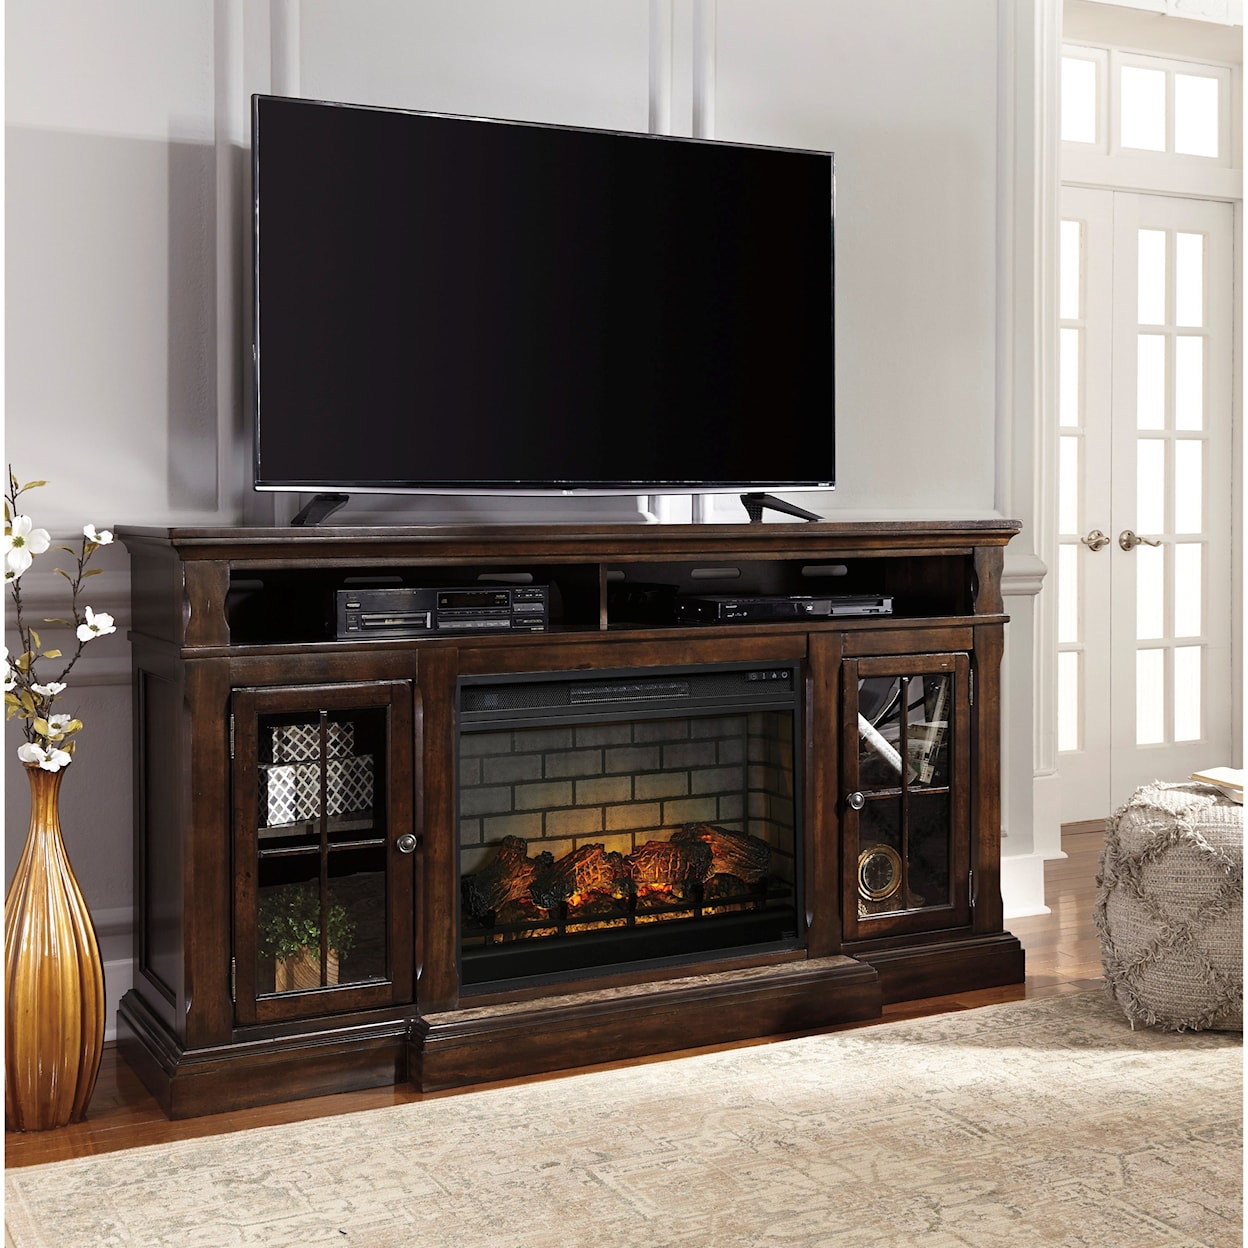 Signature Design by Ashley Furniture Roddinton Extra Large TV Stand with Fireplace Insert